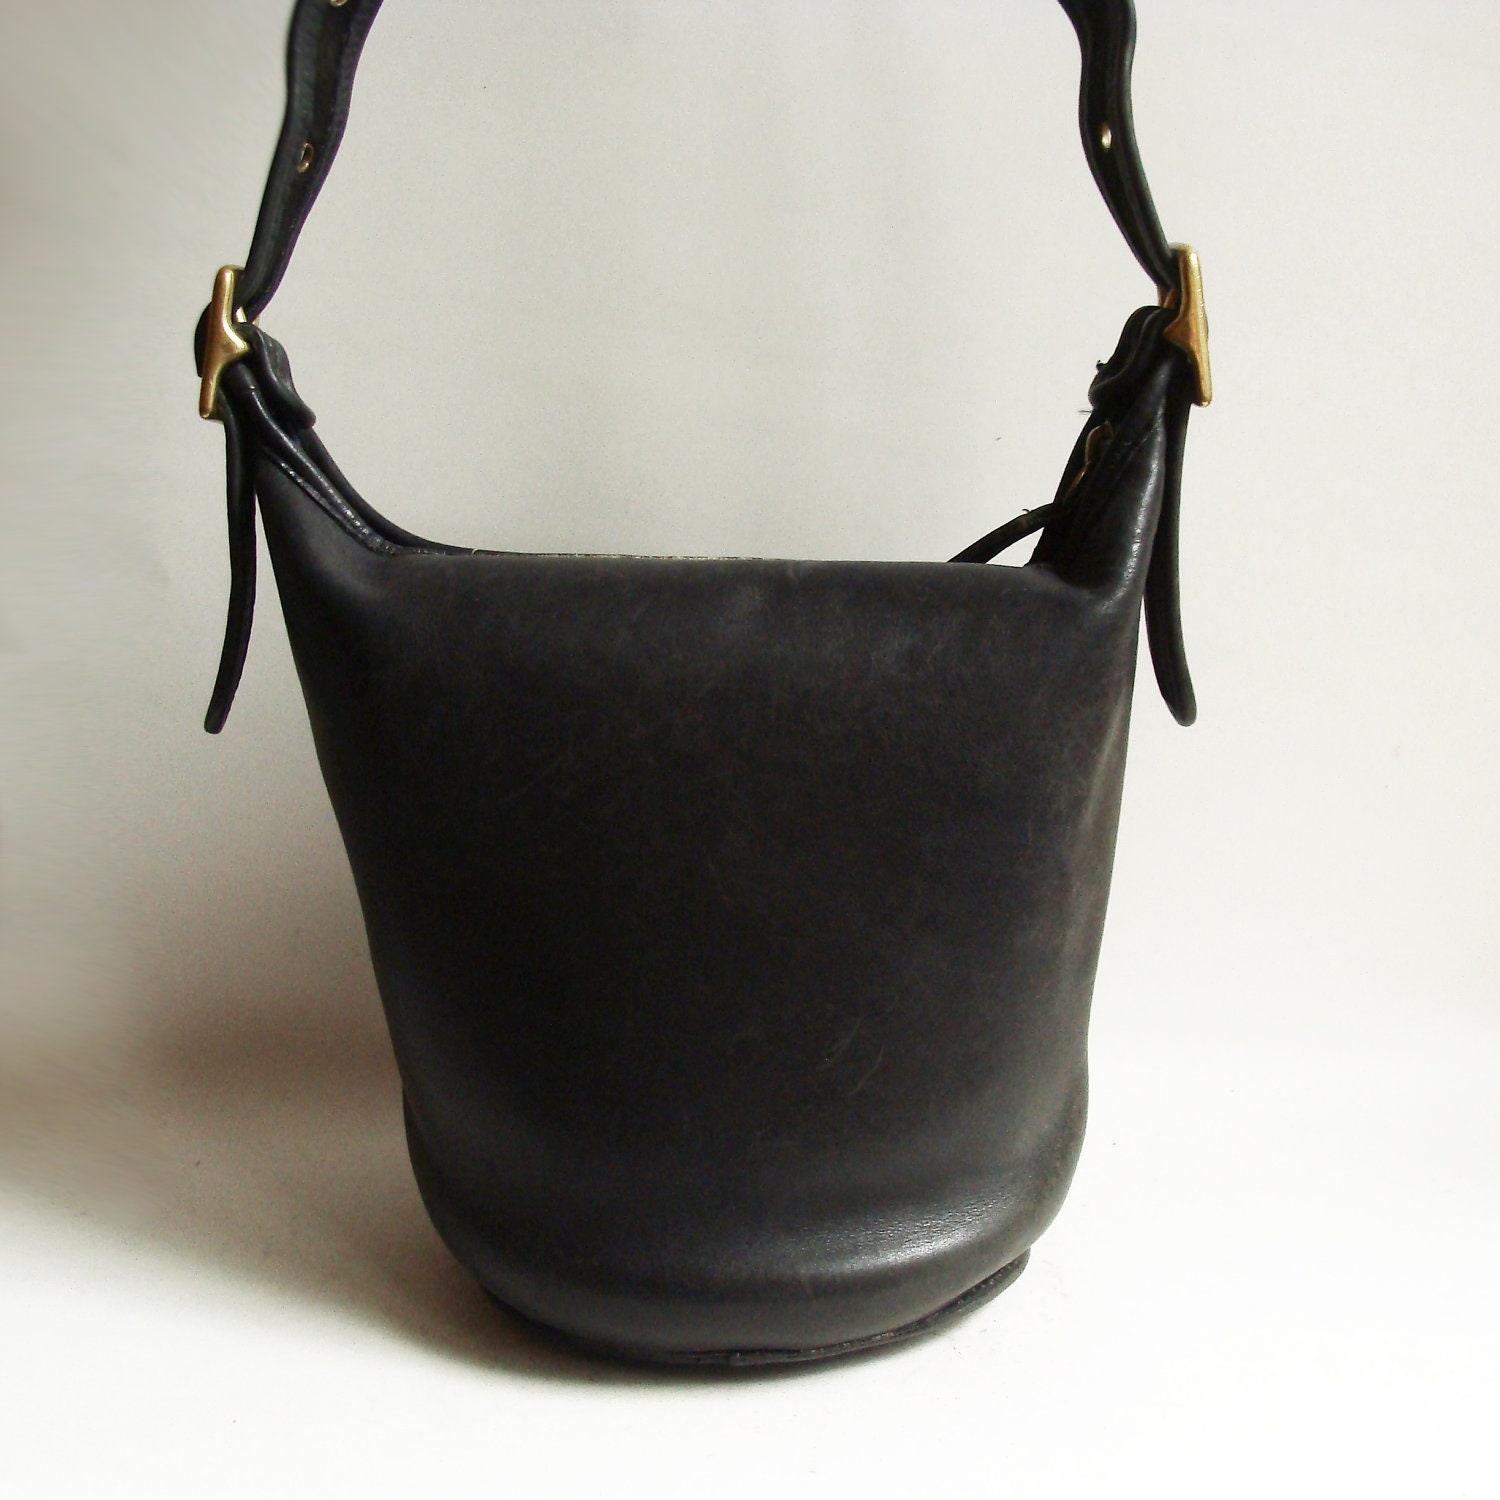 Frivolous Poll: What size is your purse? - The Chat Board - The Well ...